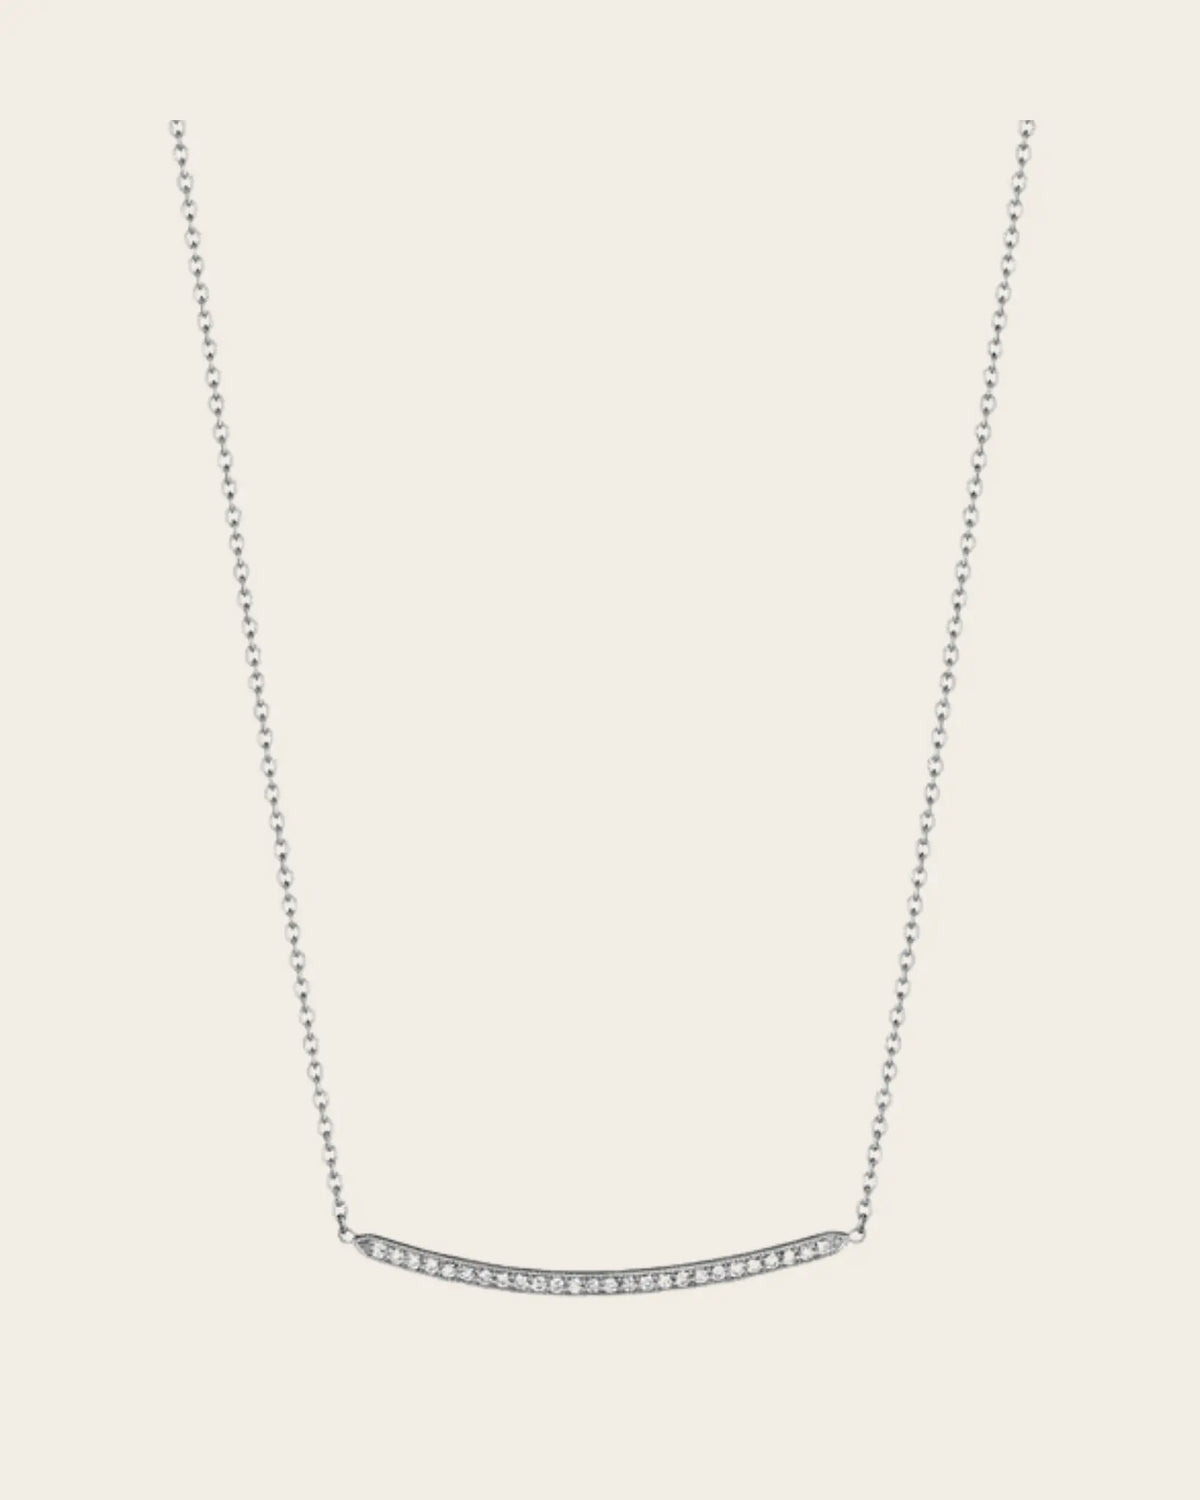 Petite Forever Bar Necklace Petite Forever Bar Necklace Penny Preville Penny Preville  Squash Blossom Vail